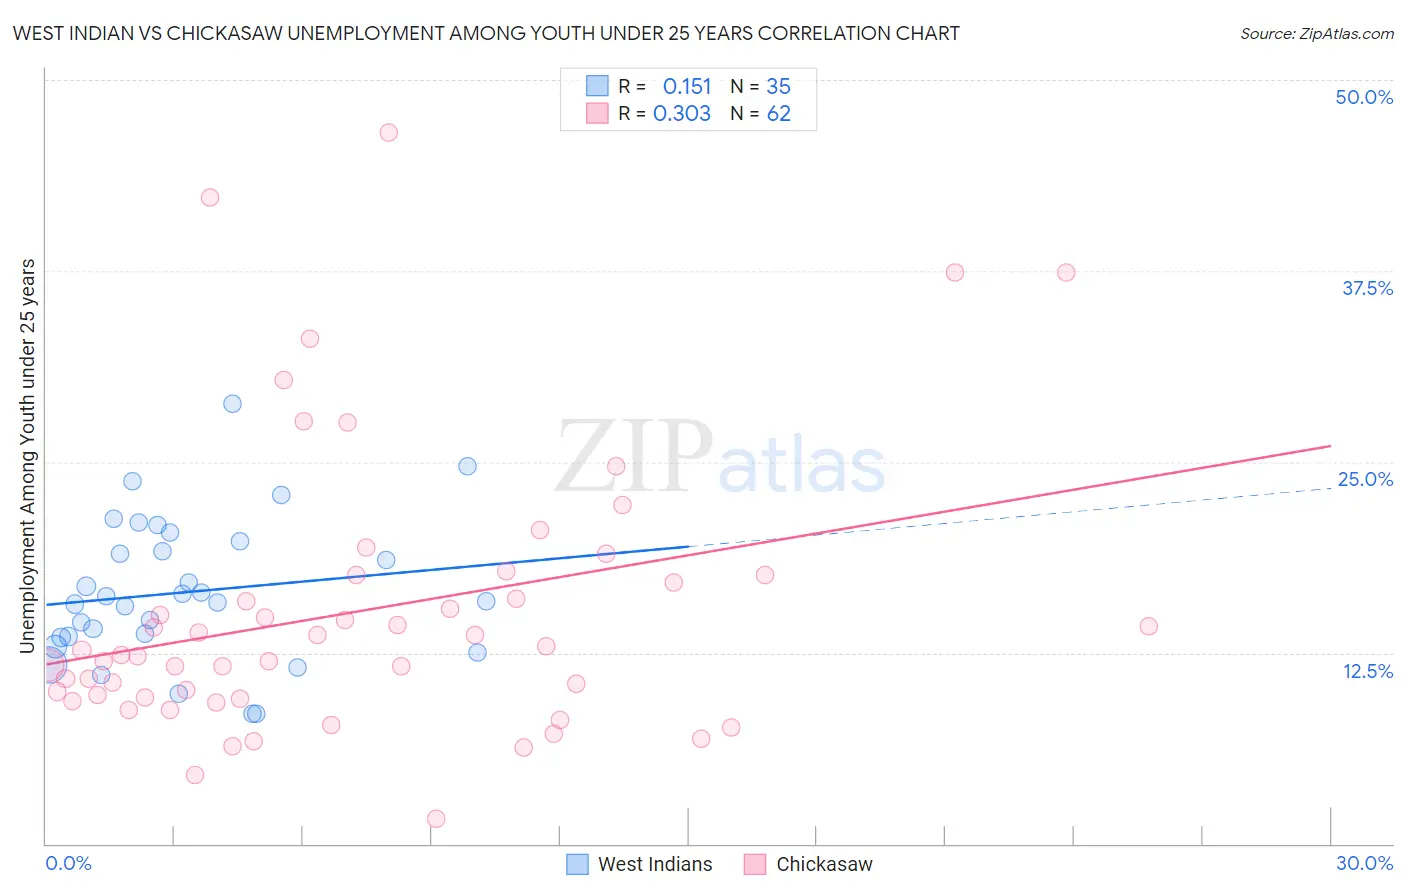 West Indian vs Chickasaw Unemployment Among Youth under 25 years